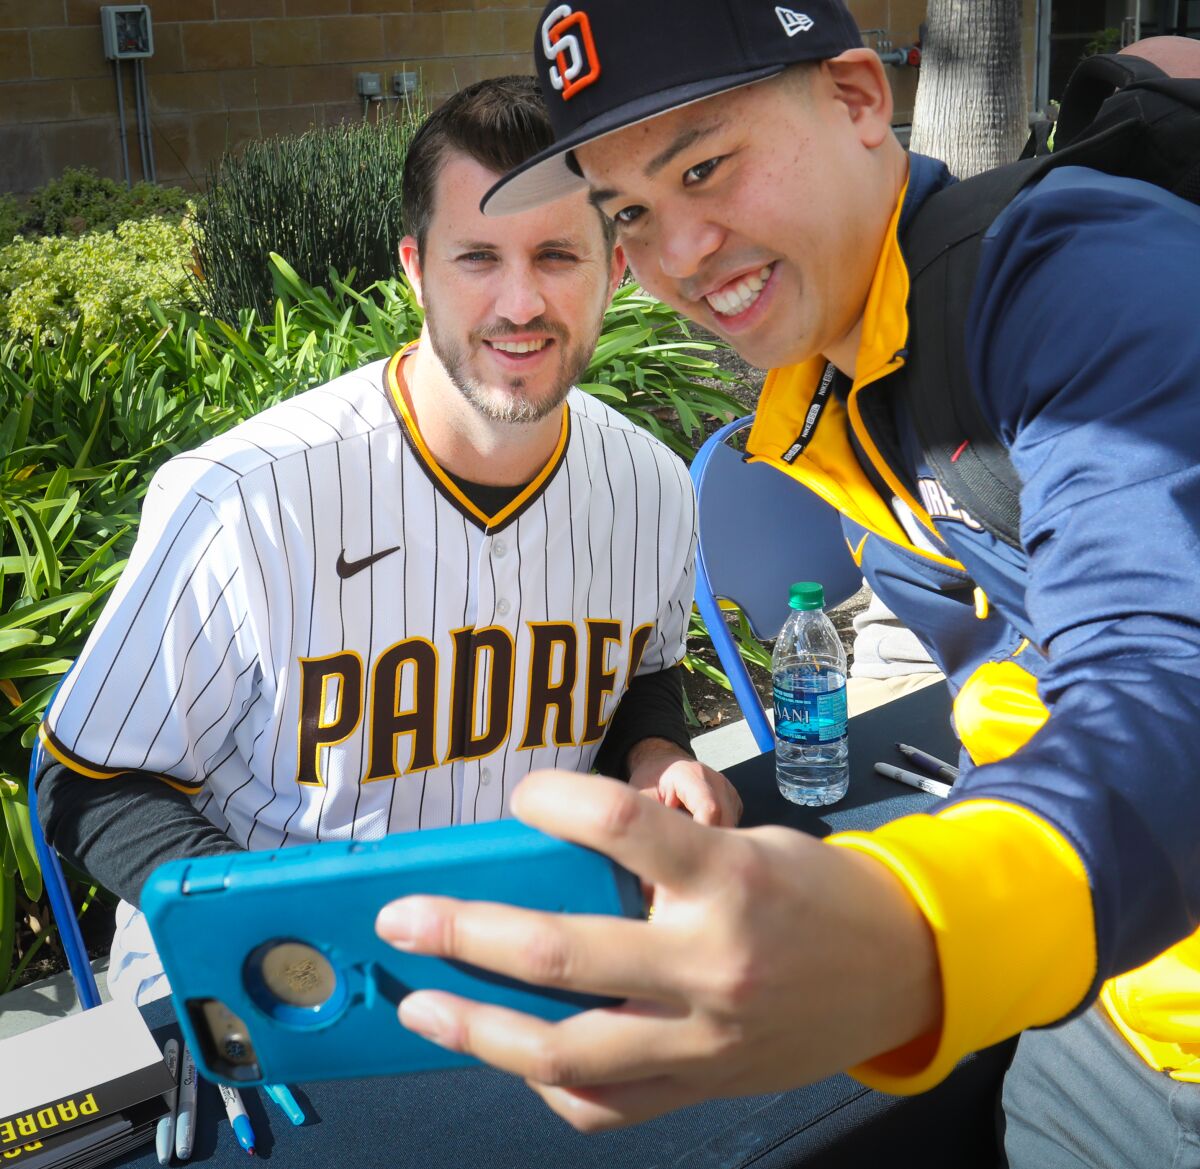 Vincent Pham of Mira Mesa takes a selfie photo with San Diego Padres pitcher Drew Pomeranz during Padres FanFest 2020 on Saturday at Petco Park.